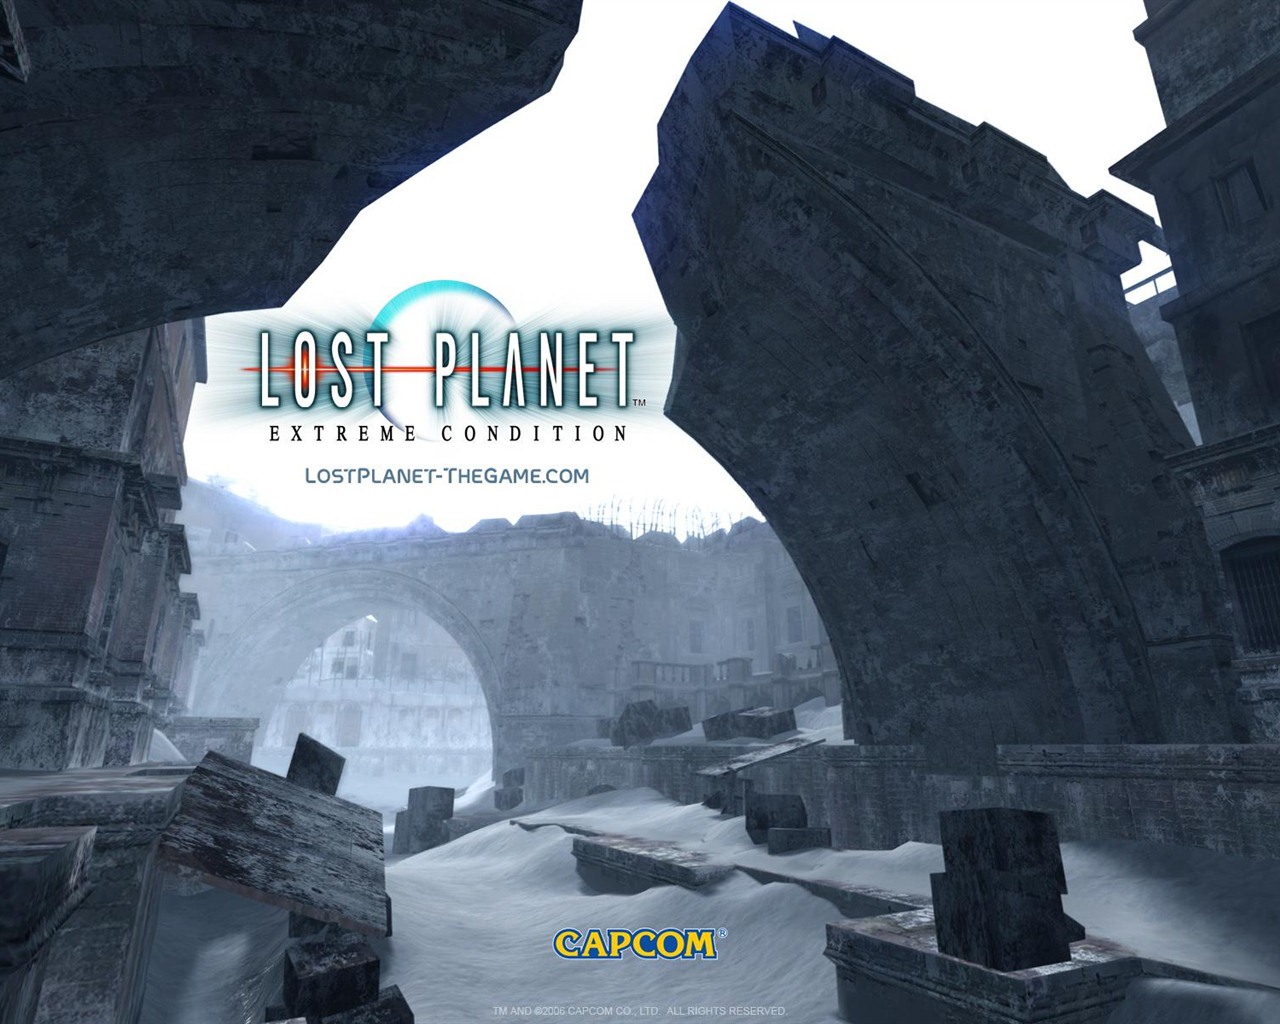 Lost Planet: Extreme Condition HD tapety na plochu #15 - 1280x1024